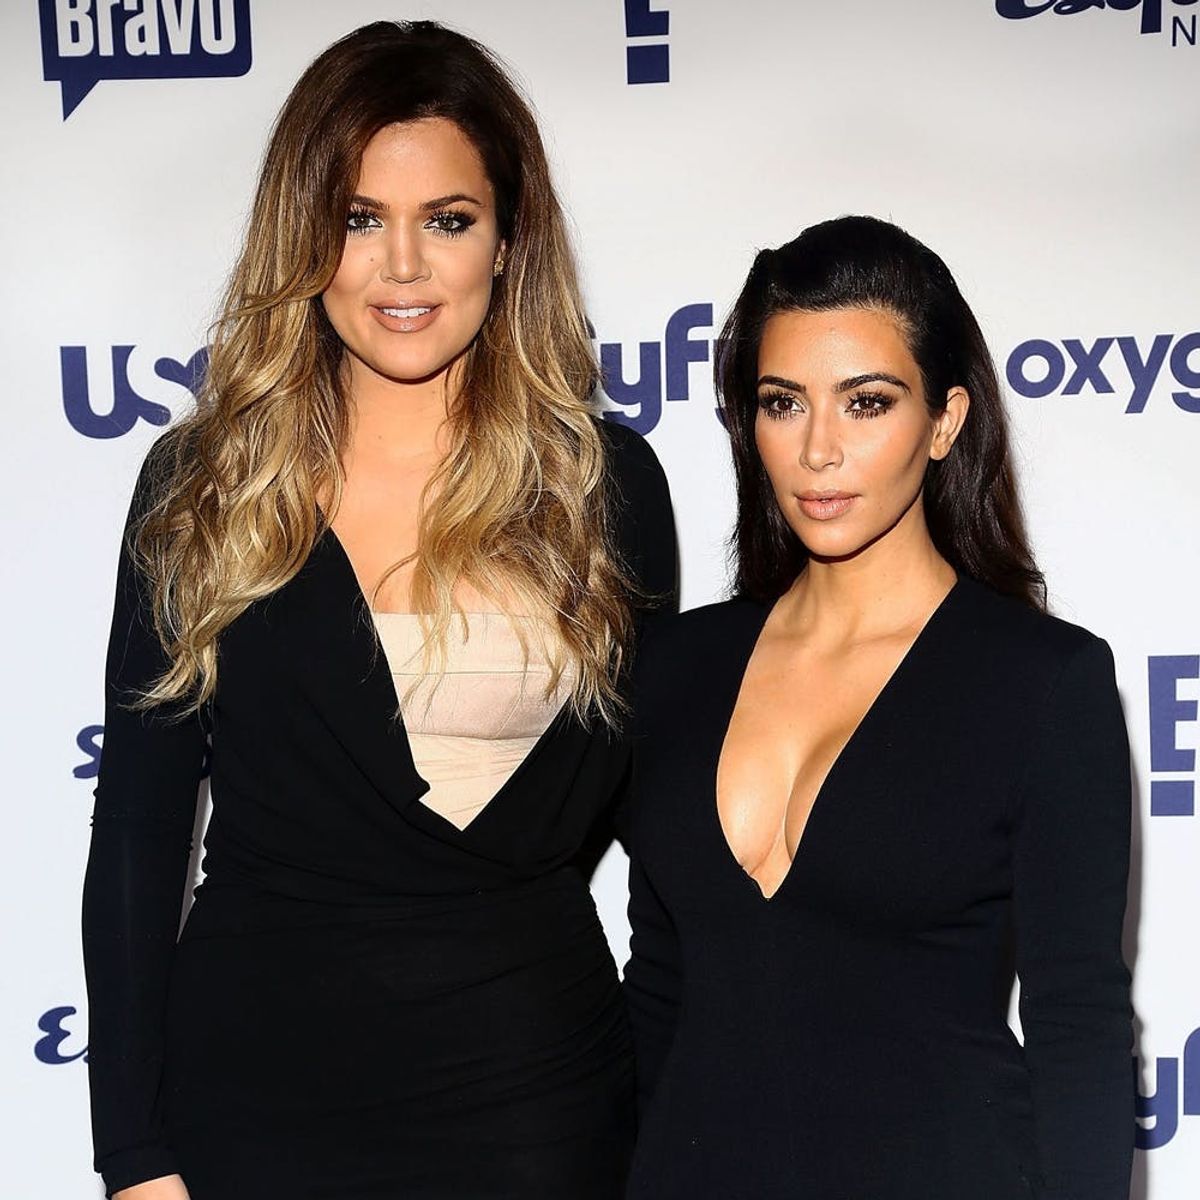 This Is How Khloe Kardashian *Really* Feels About Being Compared to Kim